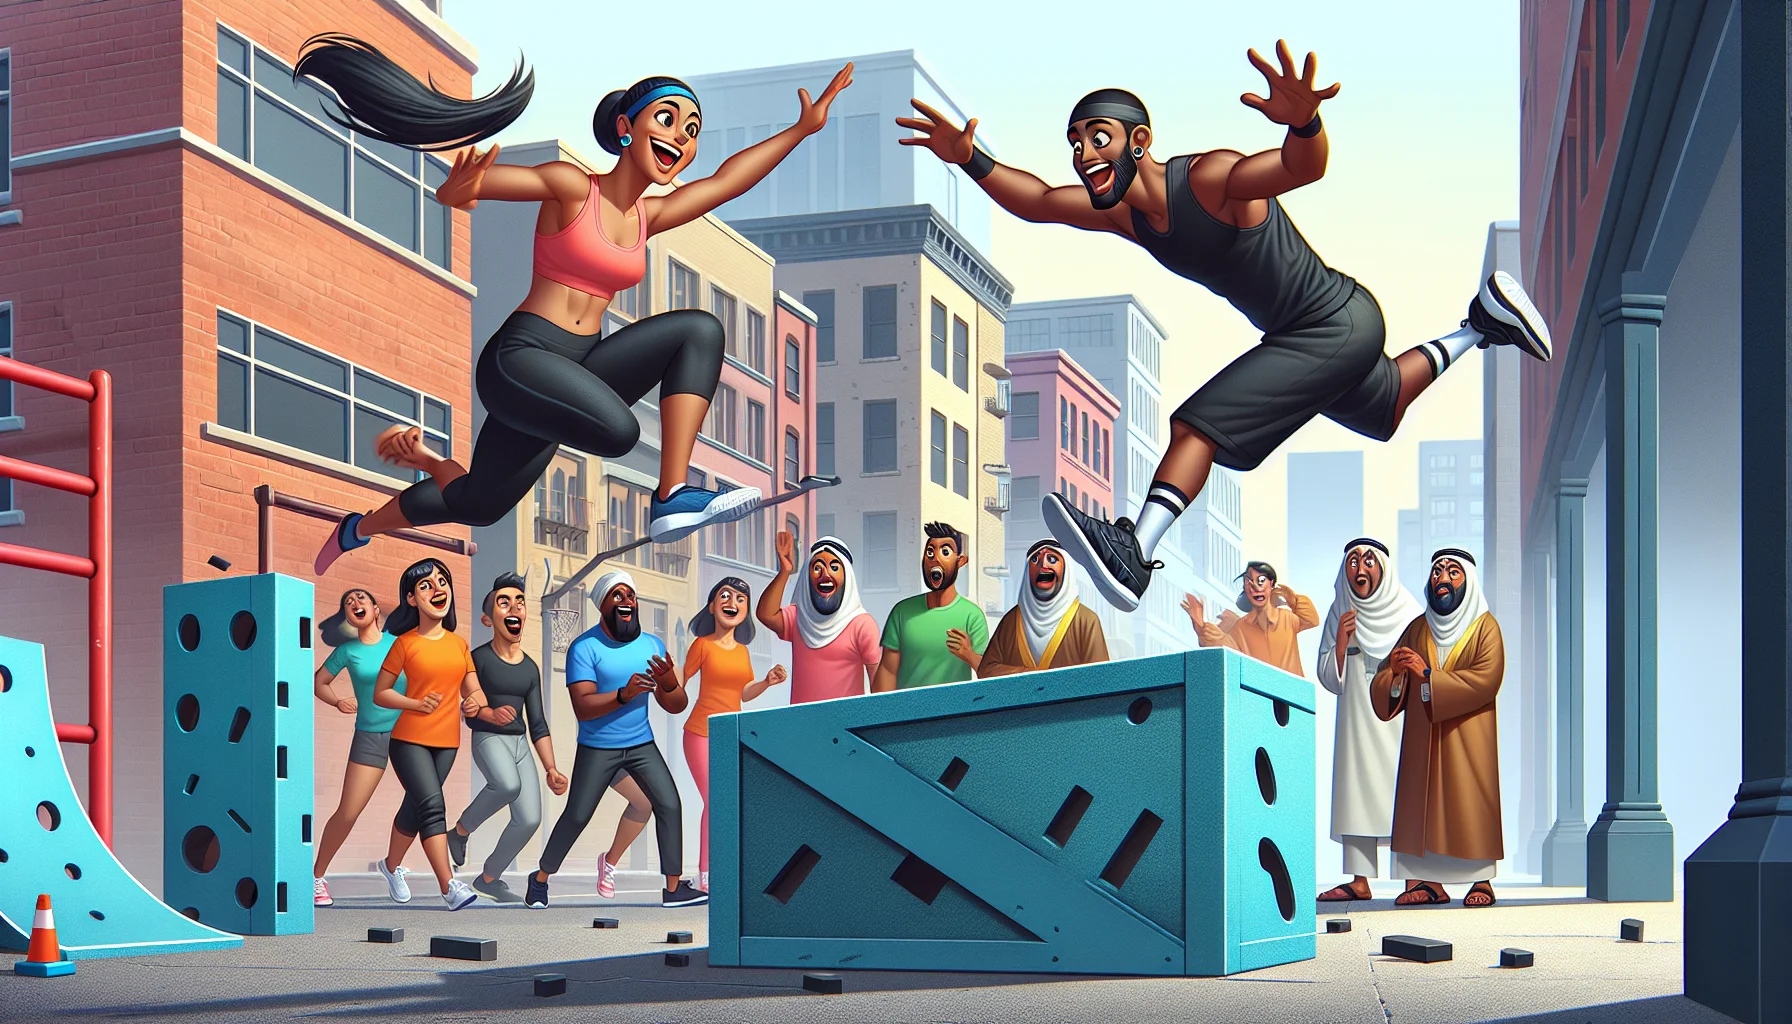 Illustrate a humorous scenario that makes exercising look enticing. This scene takes place in an urban environment and features a 3D representation of a parkour block. There's a Black woman and a Hispanic man leaping off the parkour block, demonstrating their athletic abilities, laughing, and enjoying the activity. The expressions on their faces show their joy and enthusiasm. They are clearly having fun while getting an intense workout. To add to the humor, include a couple of comically surprised South Asian and Middle-Eastern bystanders watching this unexpected athletic display in their city street. Make the scene colorful and engaging to capture the exhilarating and fun elements of exercise.